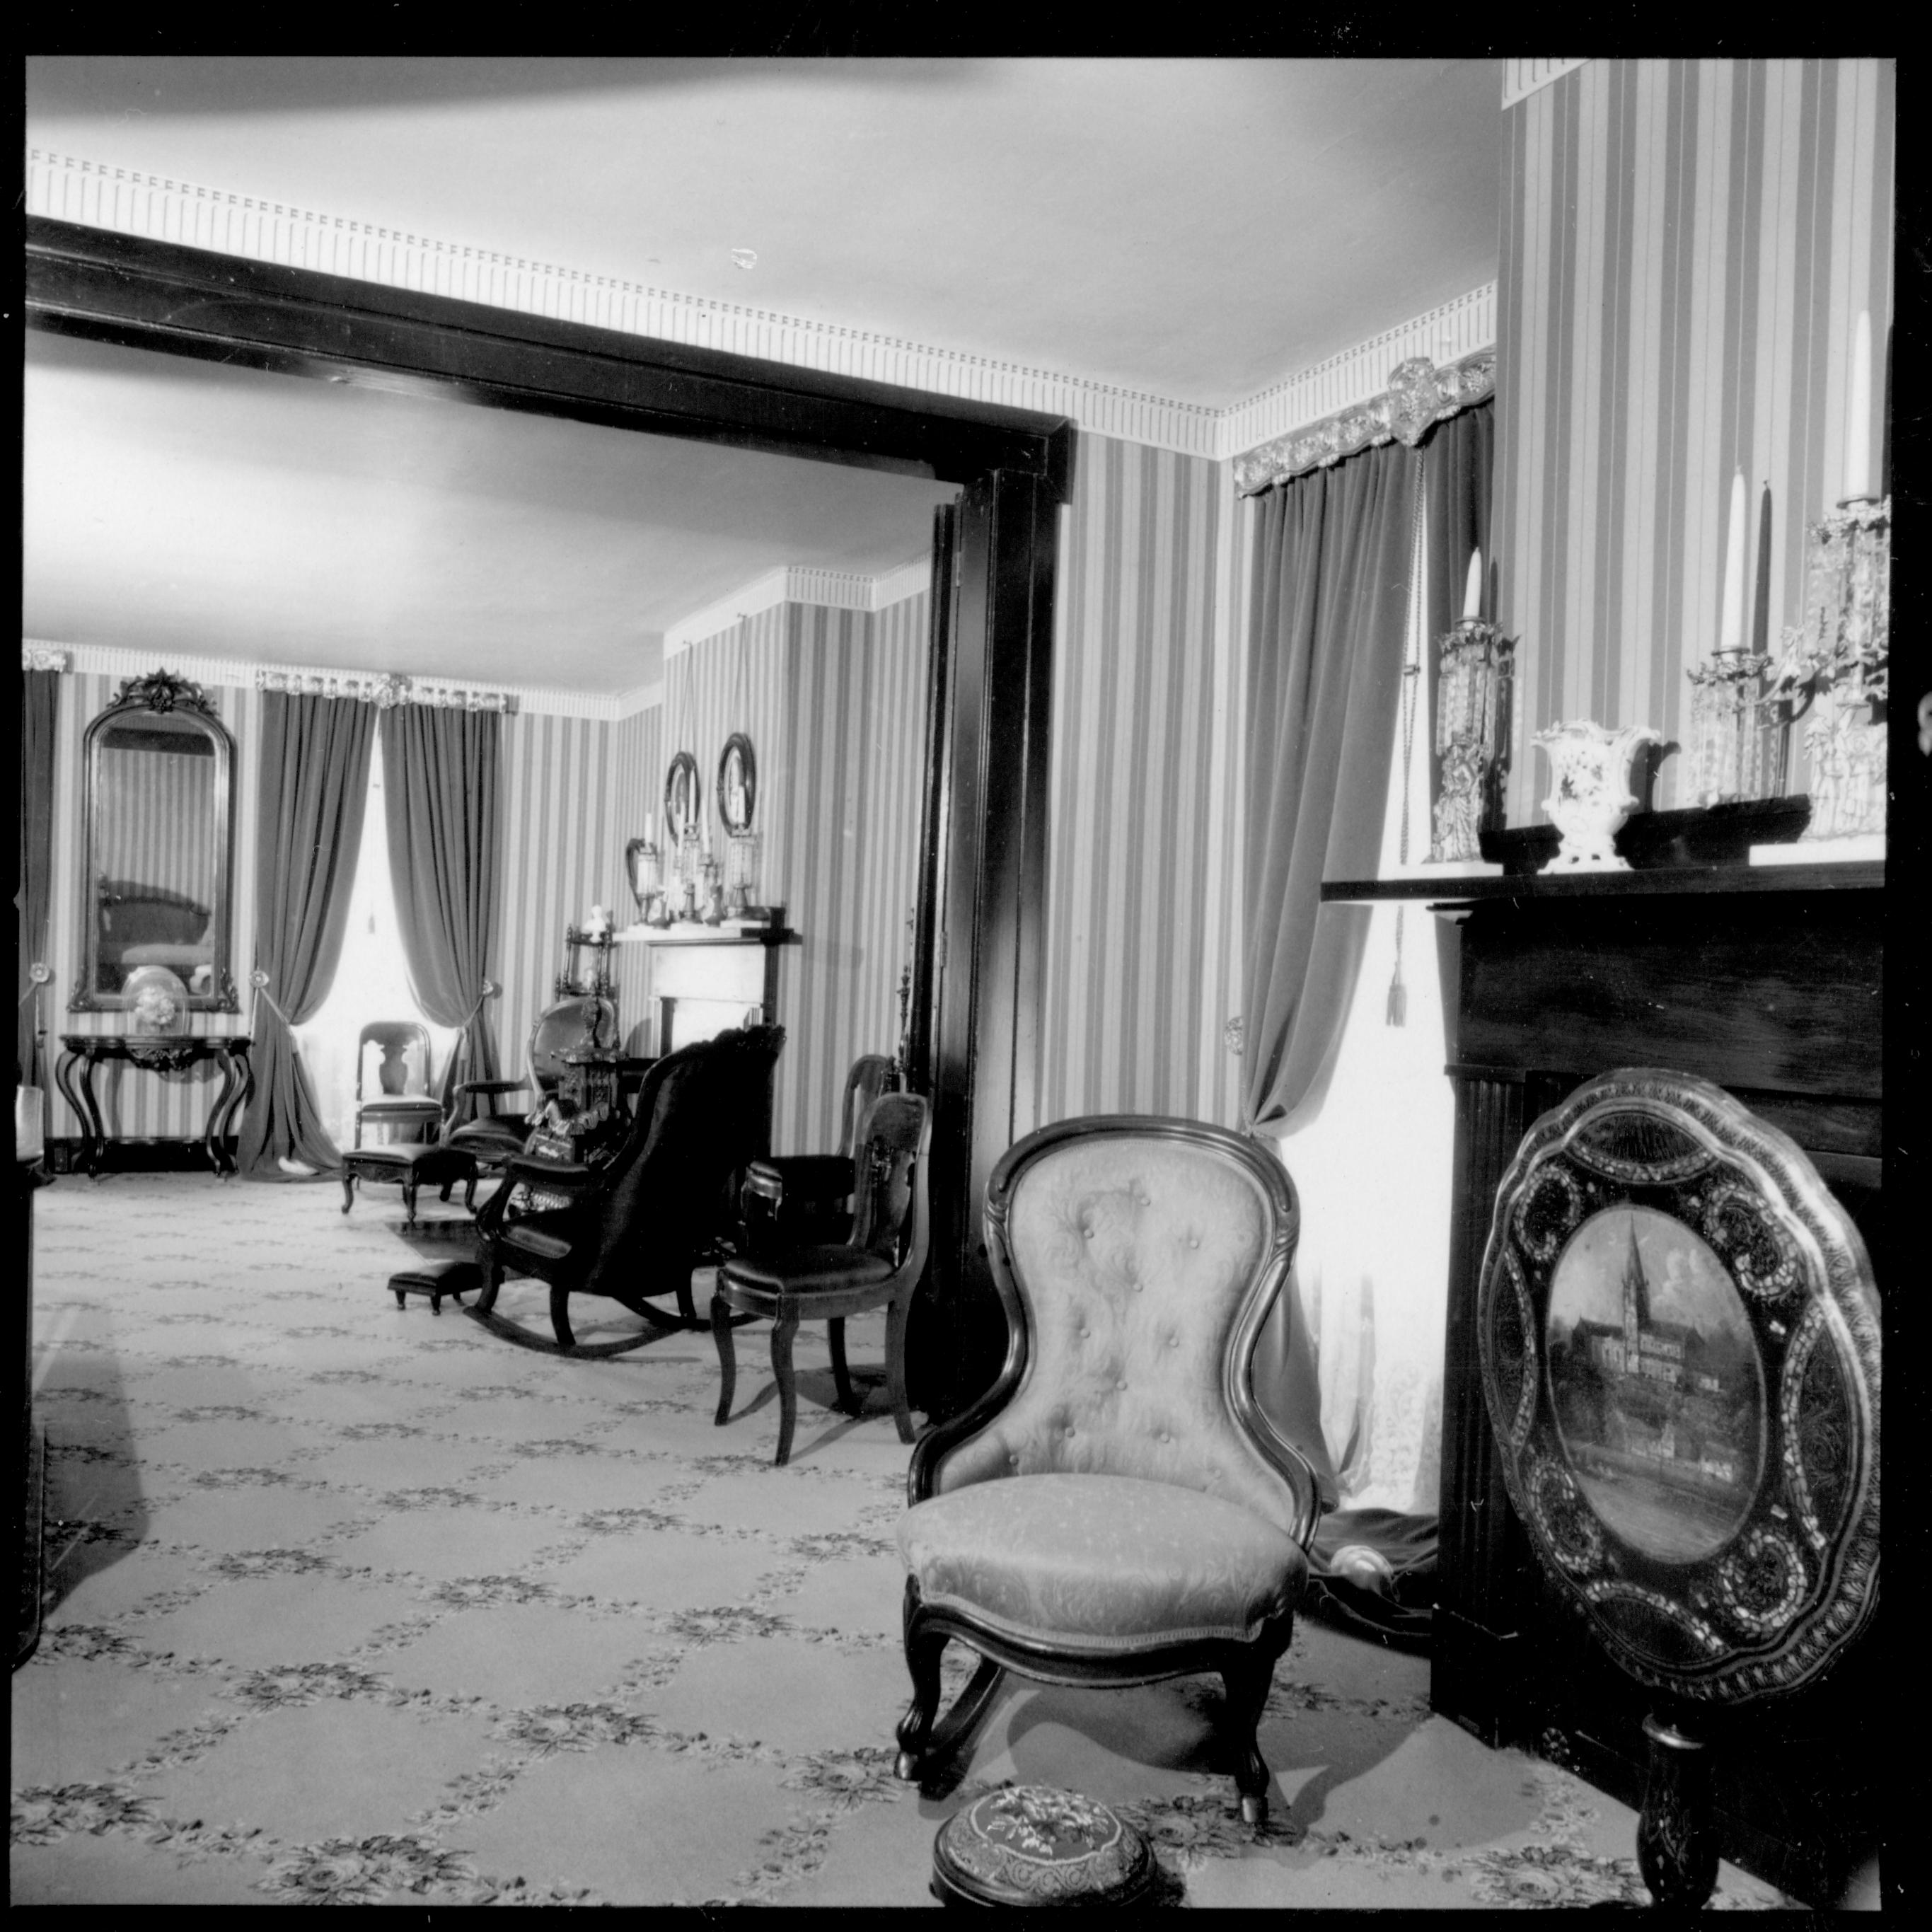 NA Lincoln, Home, Sitting, Room, Parlor